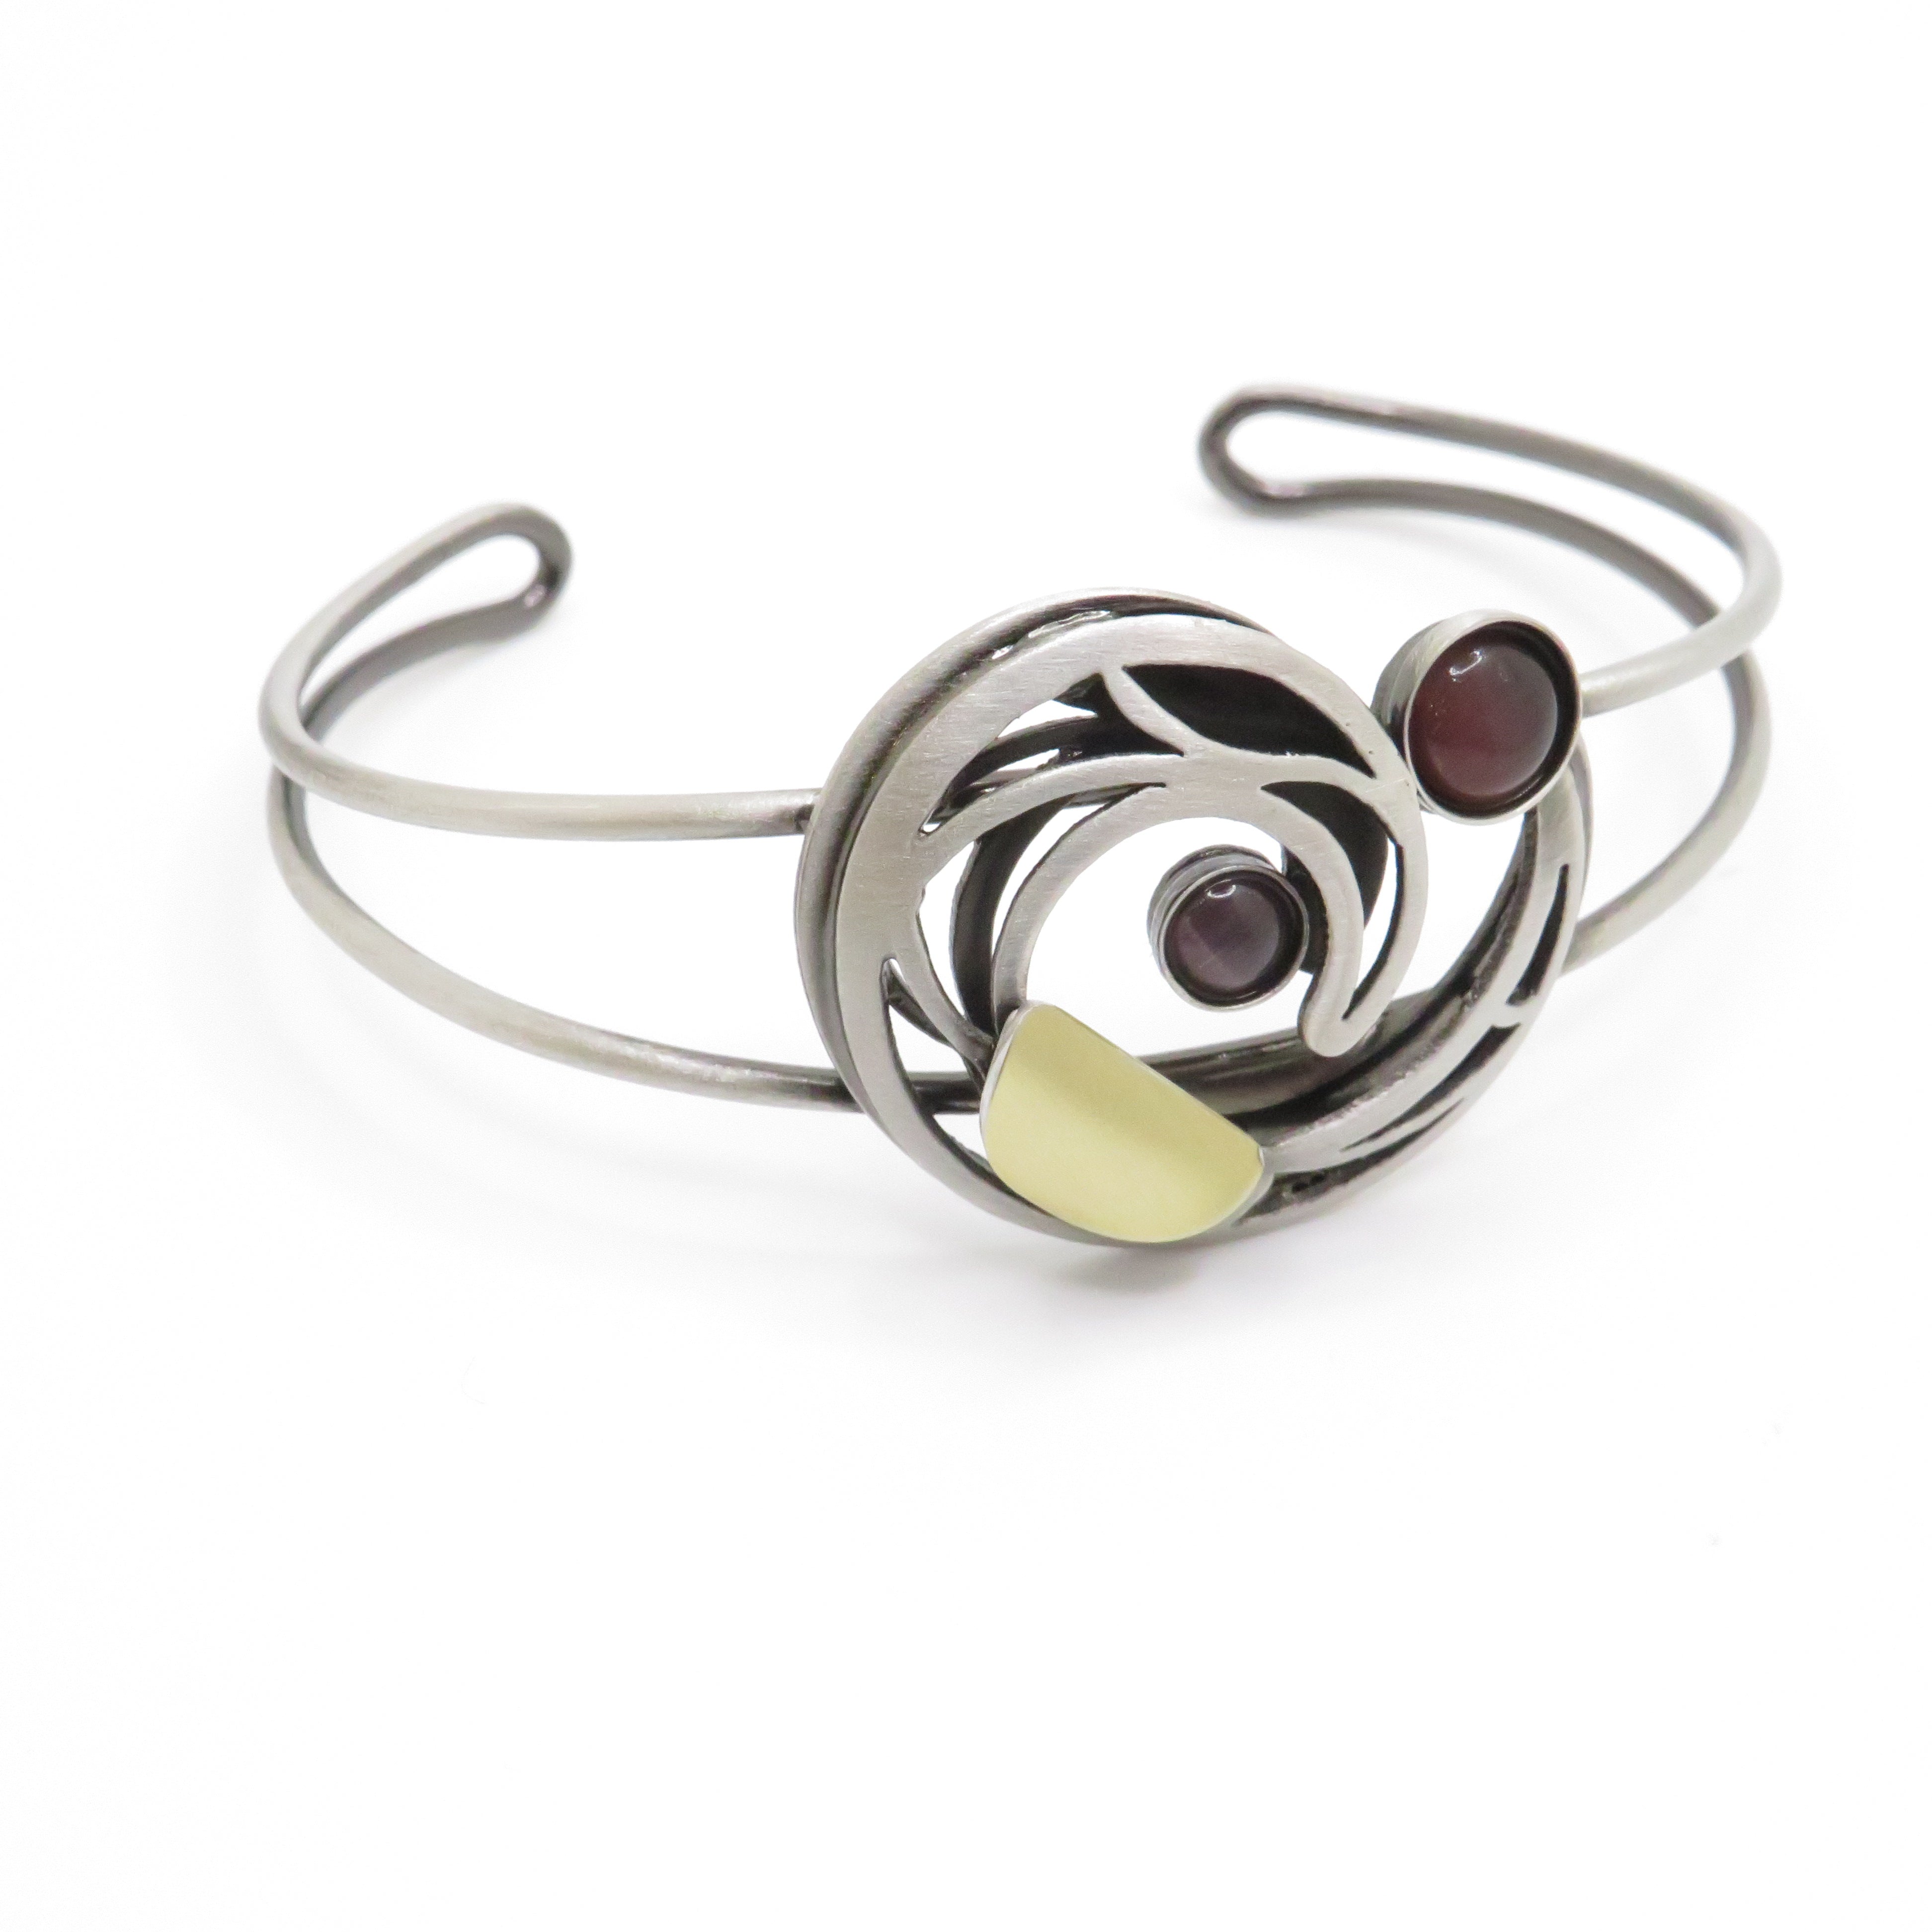 silver cuff bracelet with glass bead